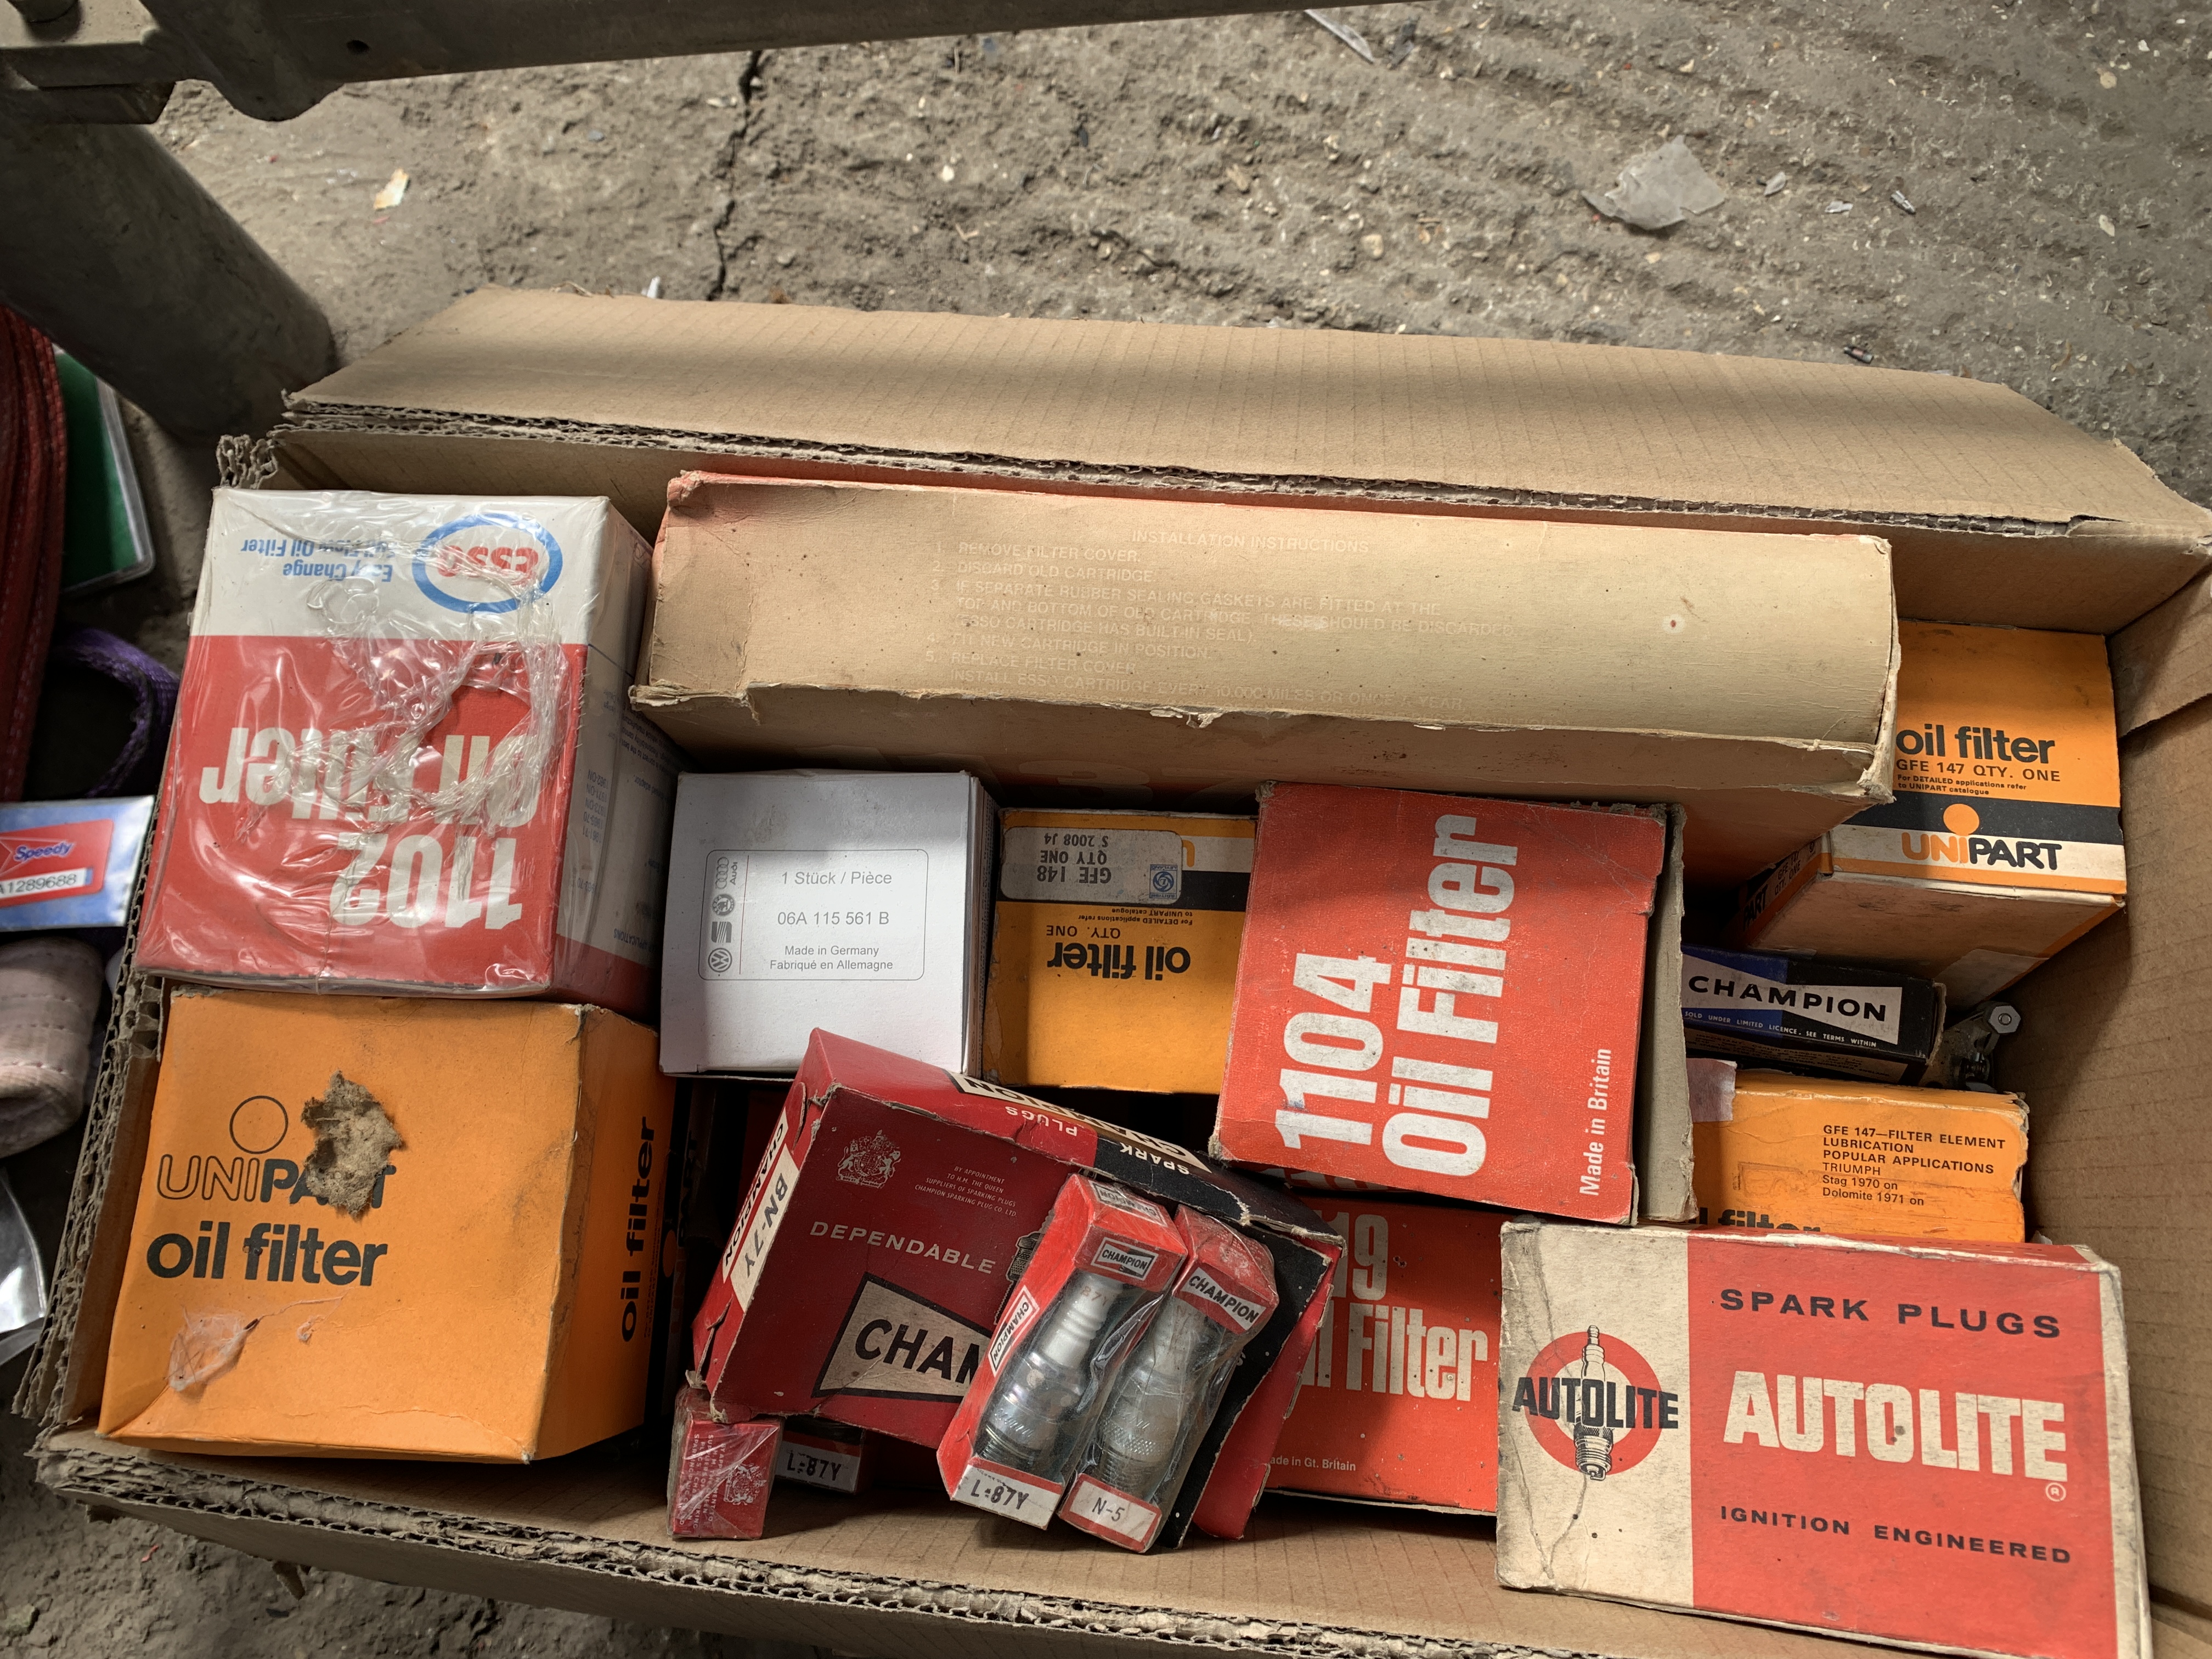 Large collection of car parts including air filters, oil filters and spark plugs